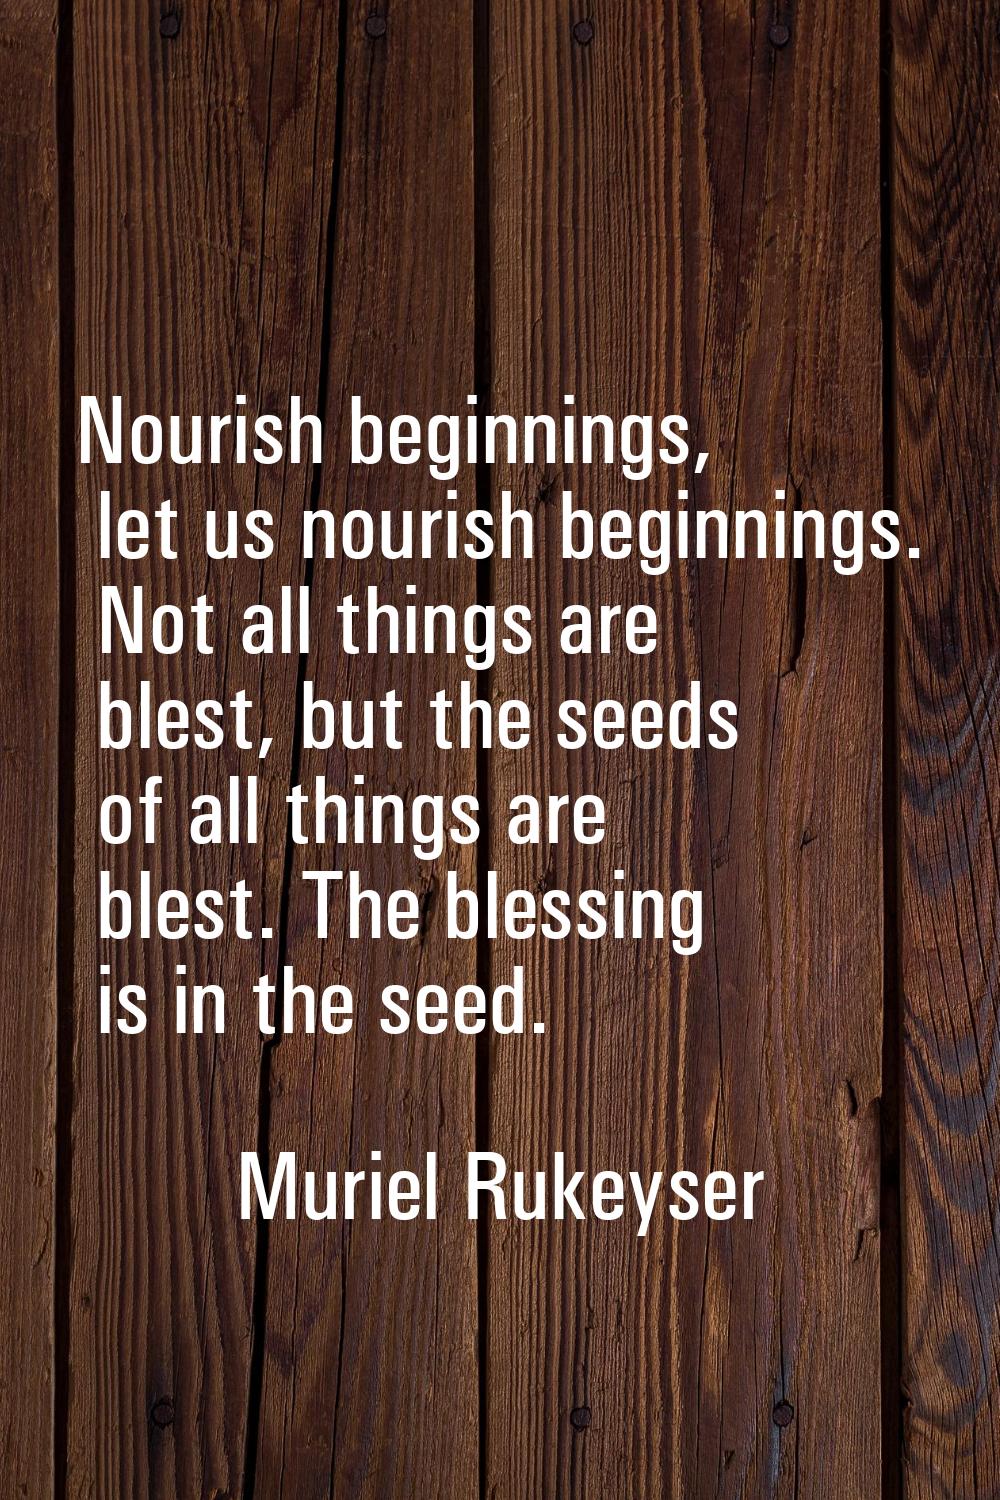 Nourish beginnings, let us nourish beginnings. Not all things are blest, but the seeds of all thing